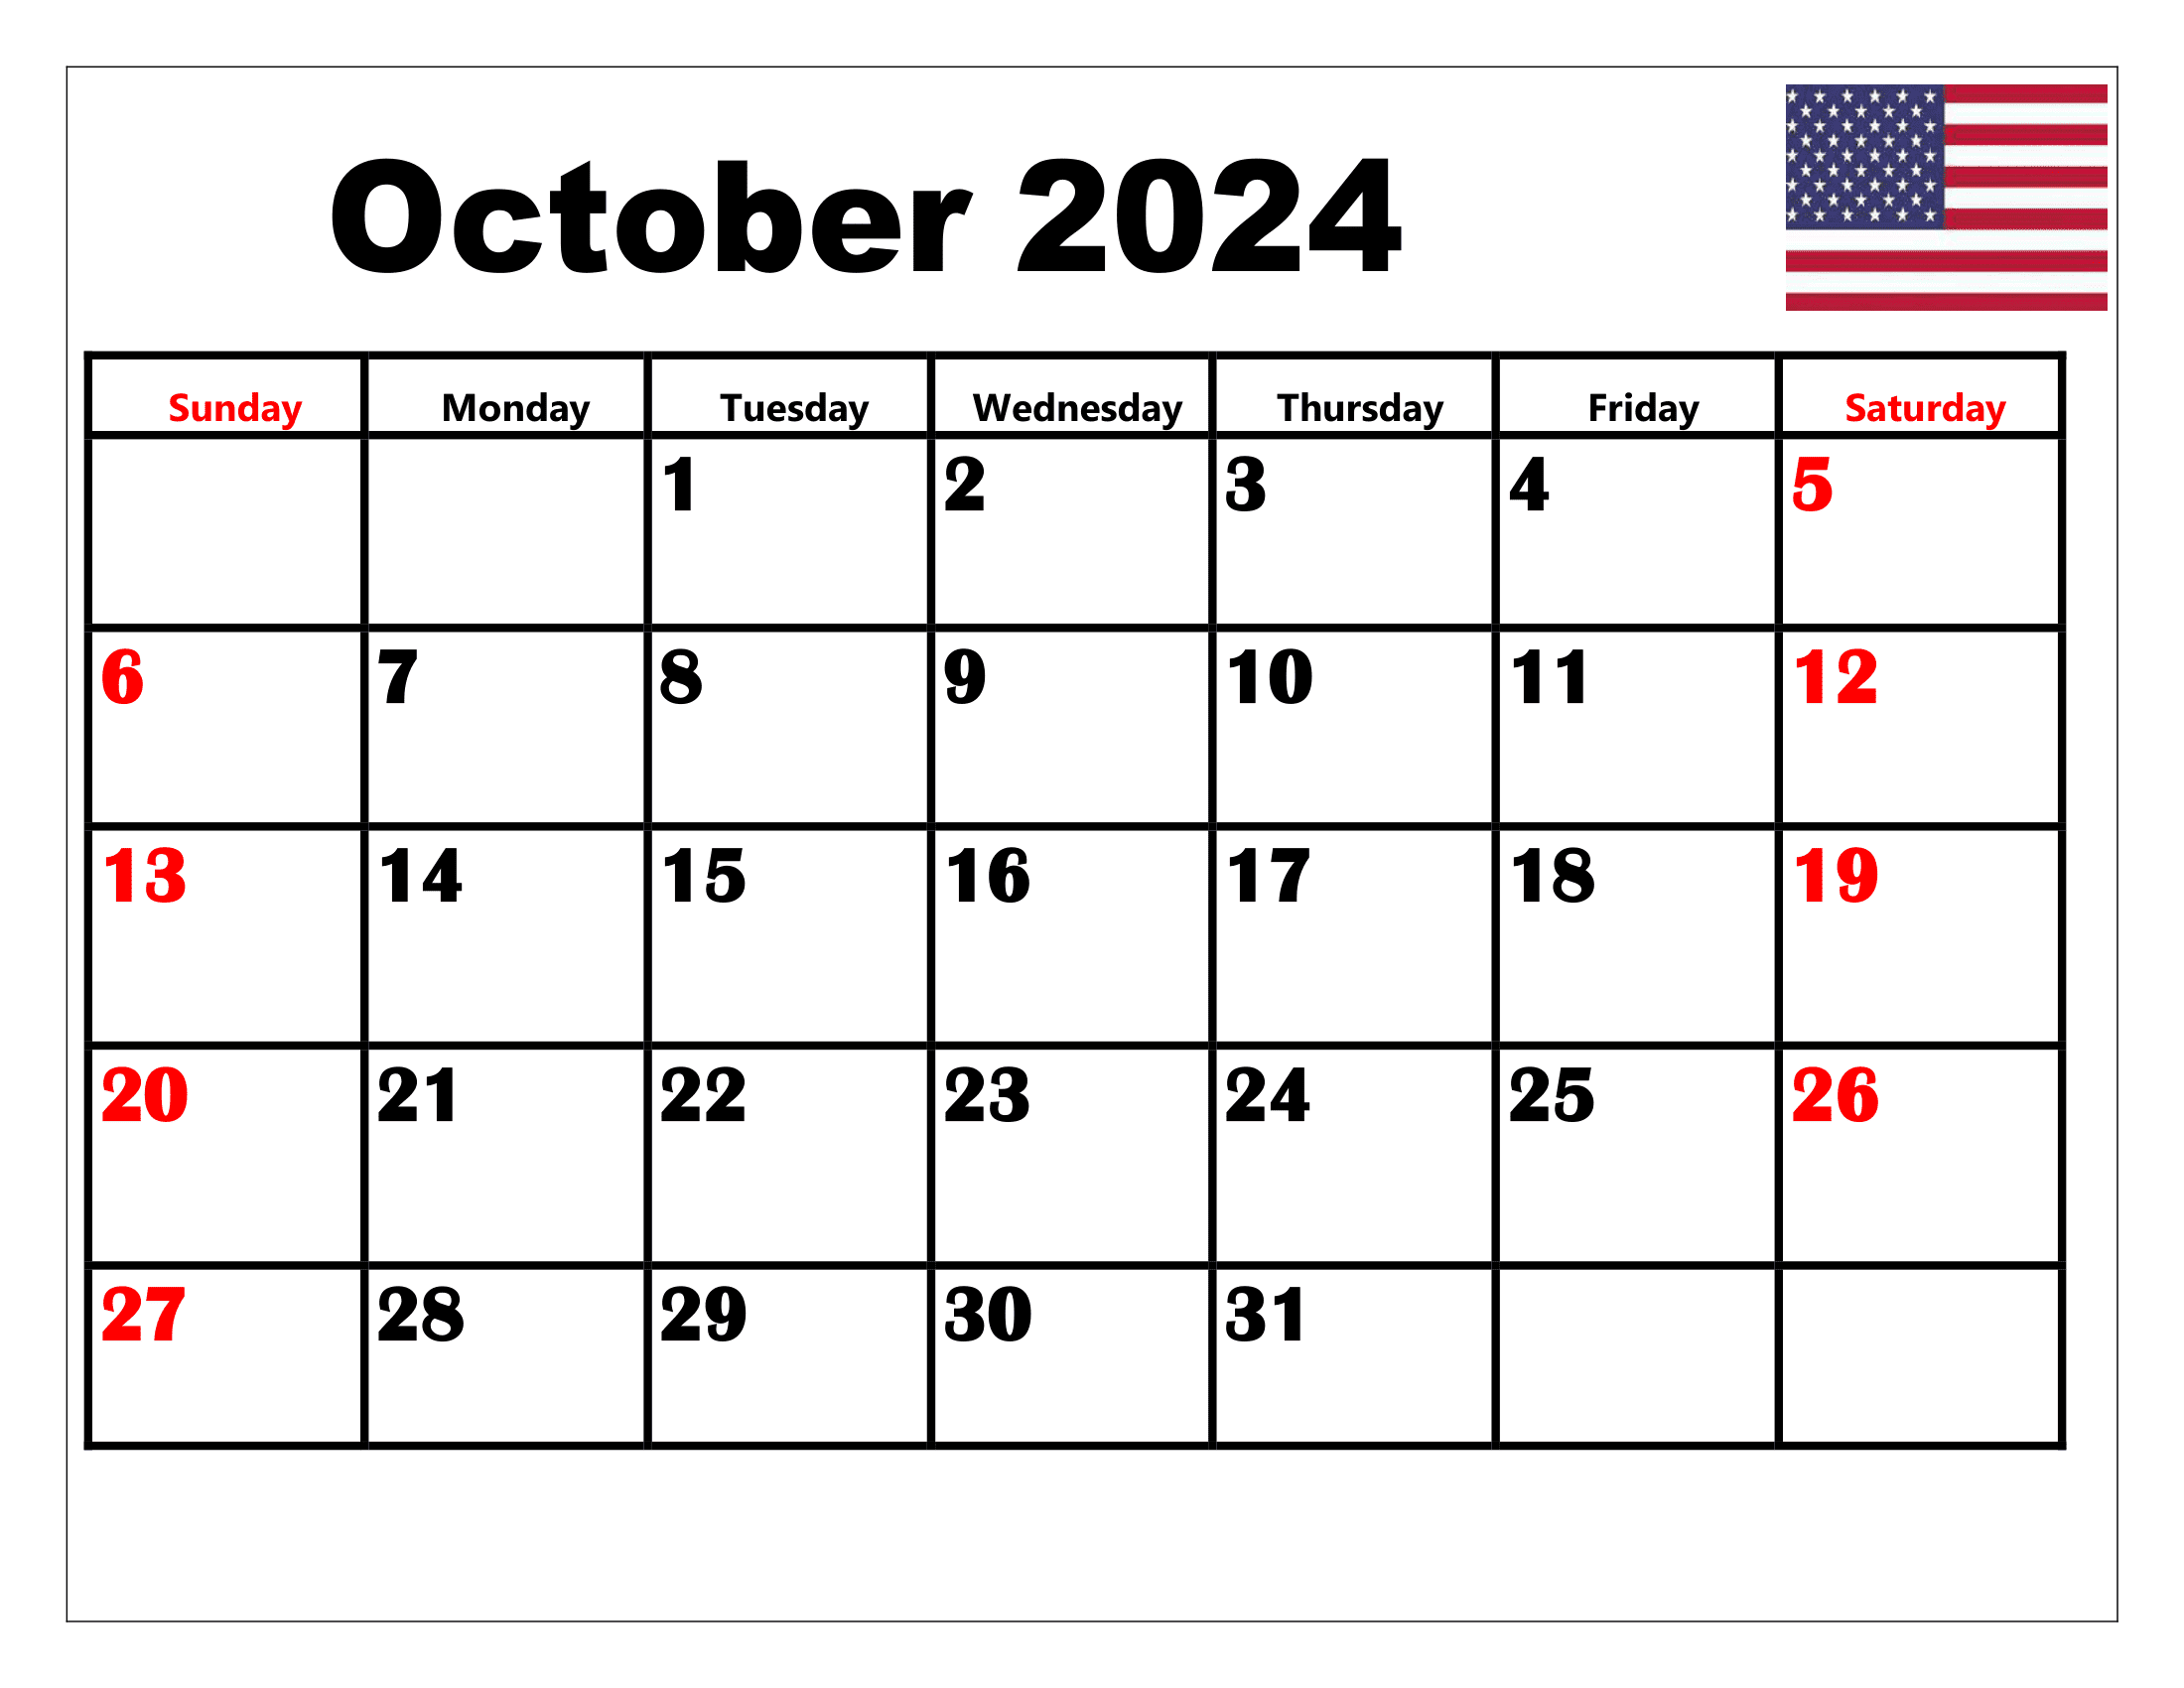 October 2024 Calendar Printable Pdf Free Templates With Holidays intended for Free Printable Appointment Calendar October 2024